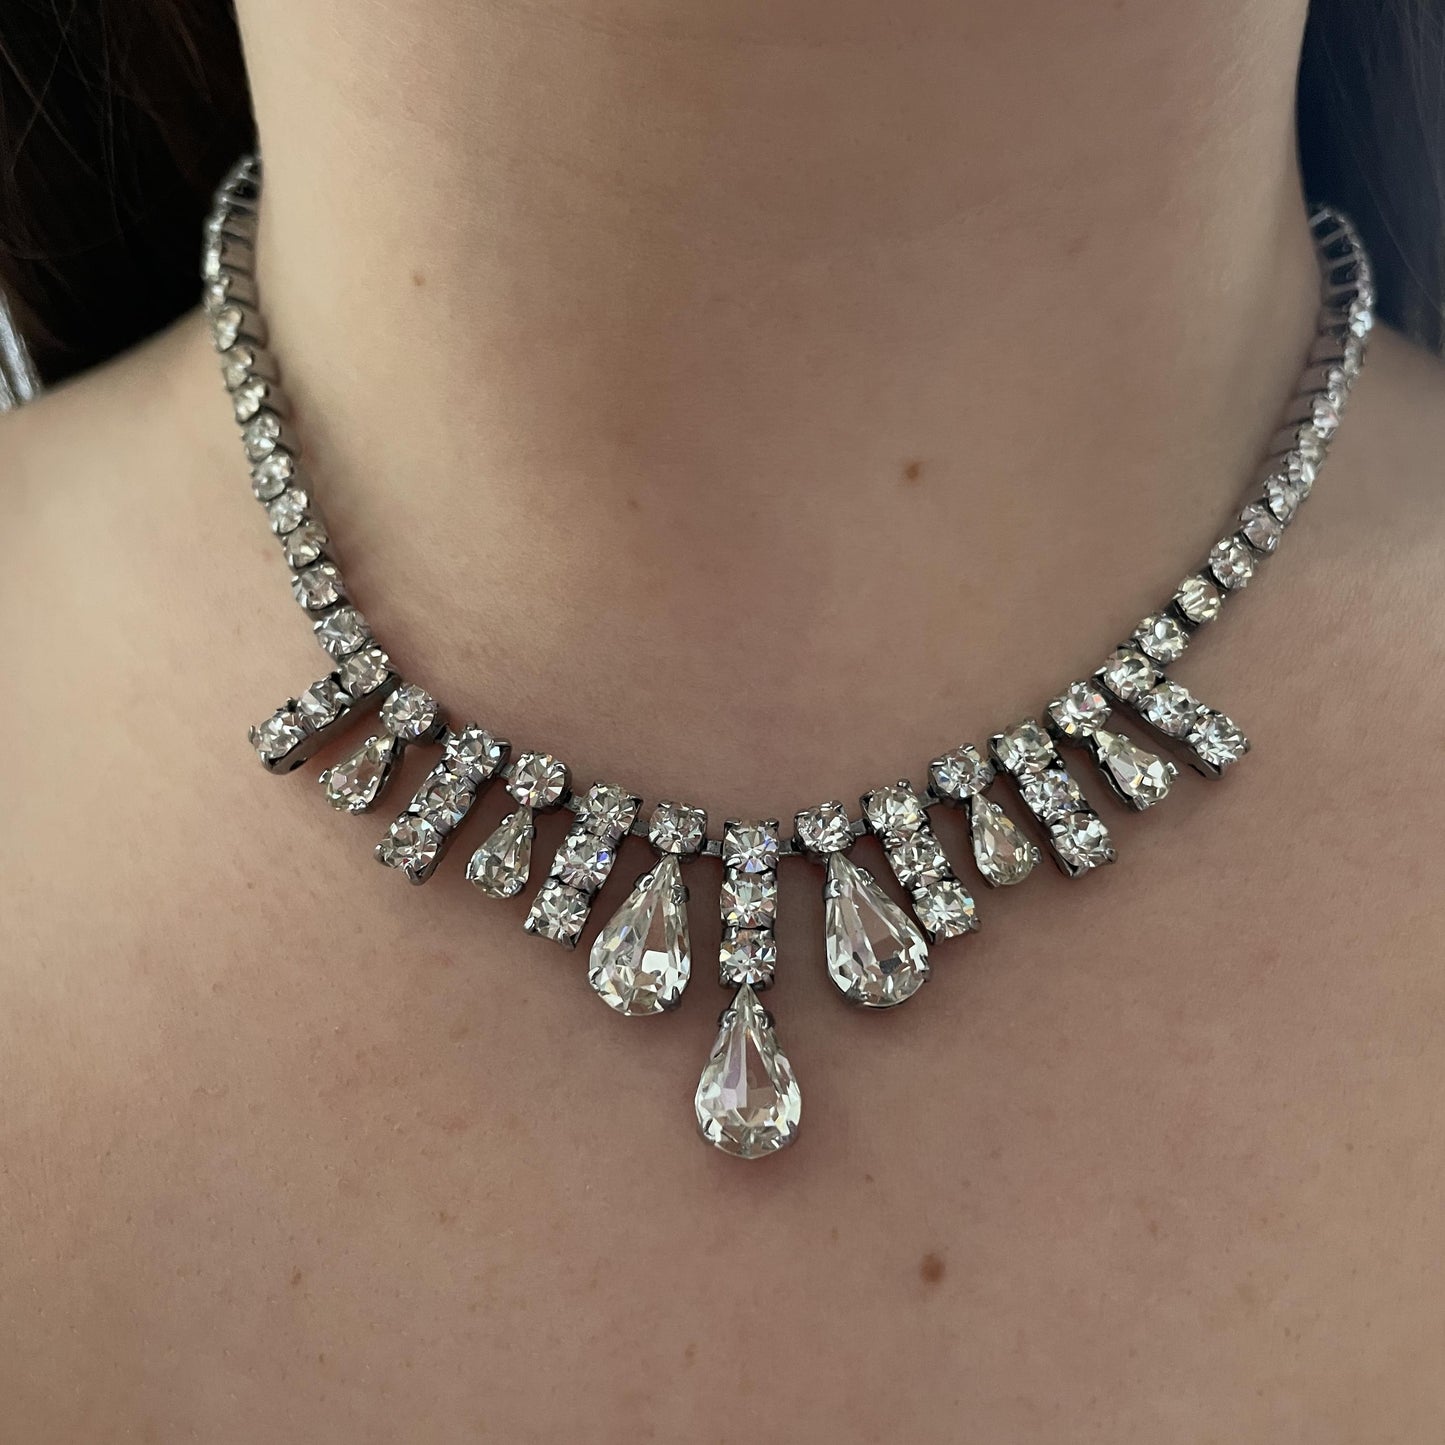 1980s Sparkly Silver Bling Necklace